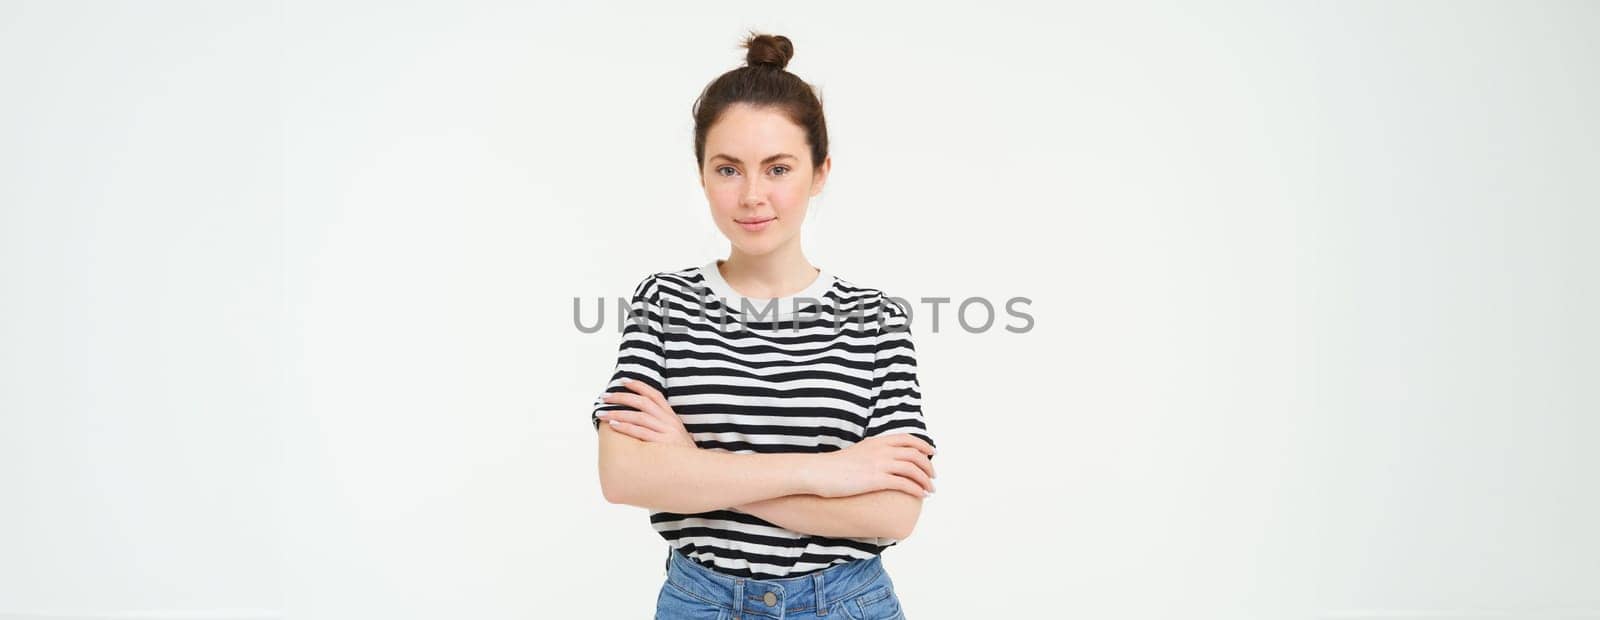 Portrait of young stylish woman, 25 years old, looking upbeat and motivated, posing for photo against white background.